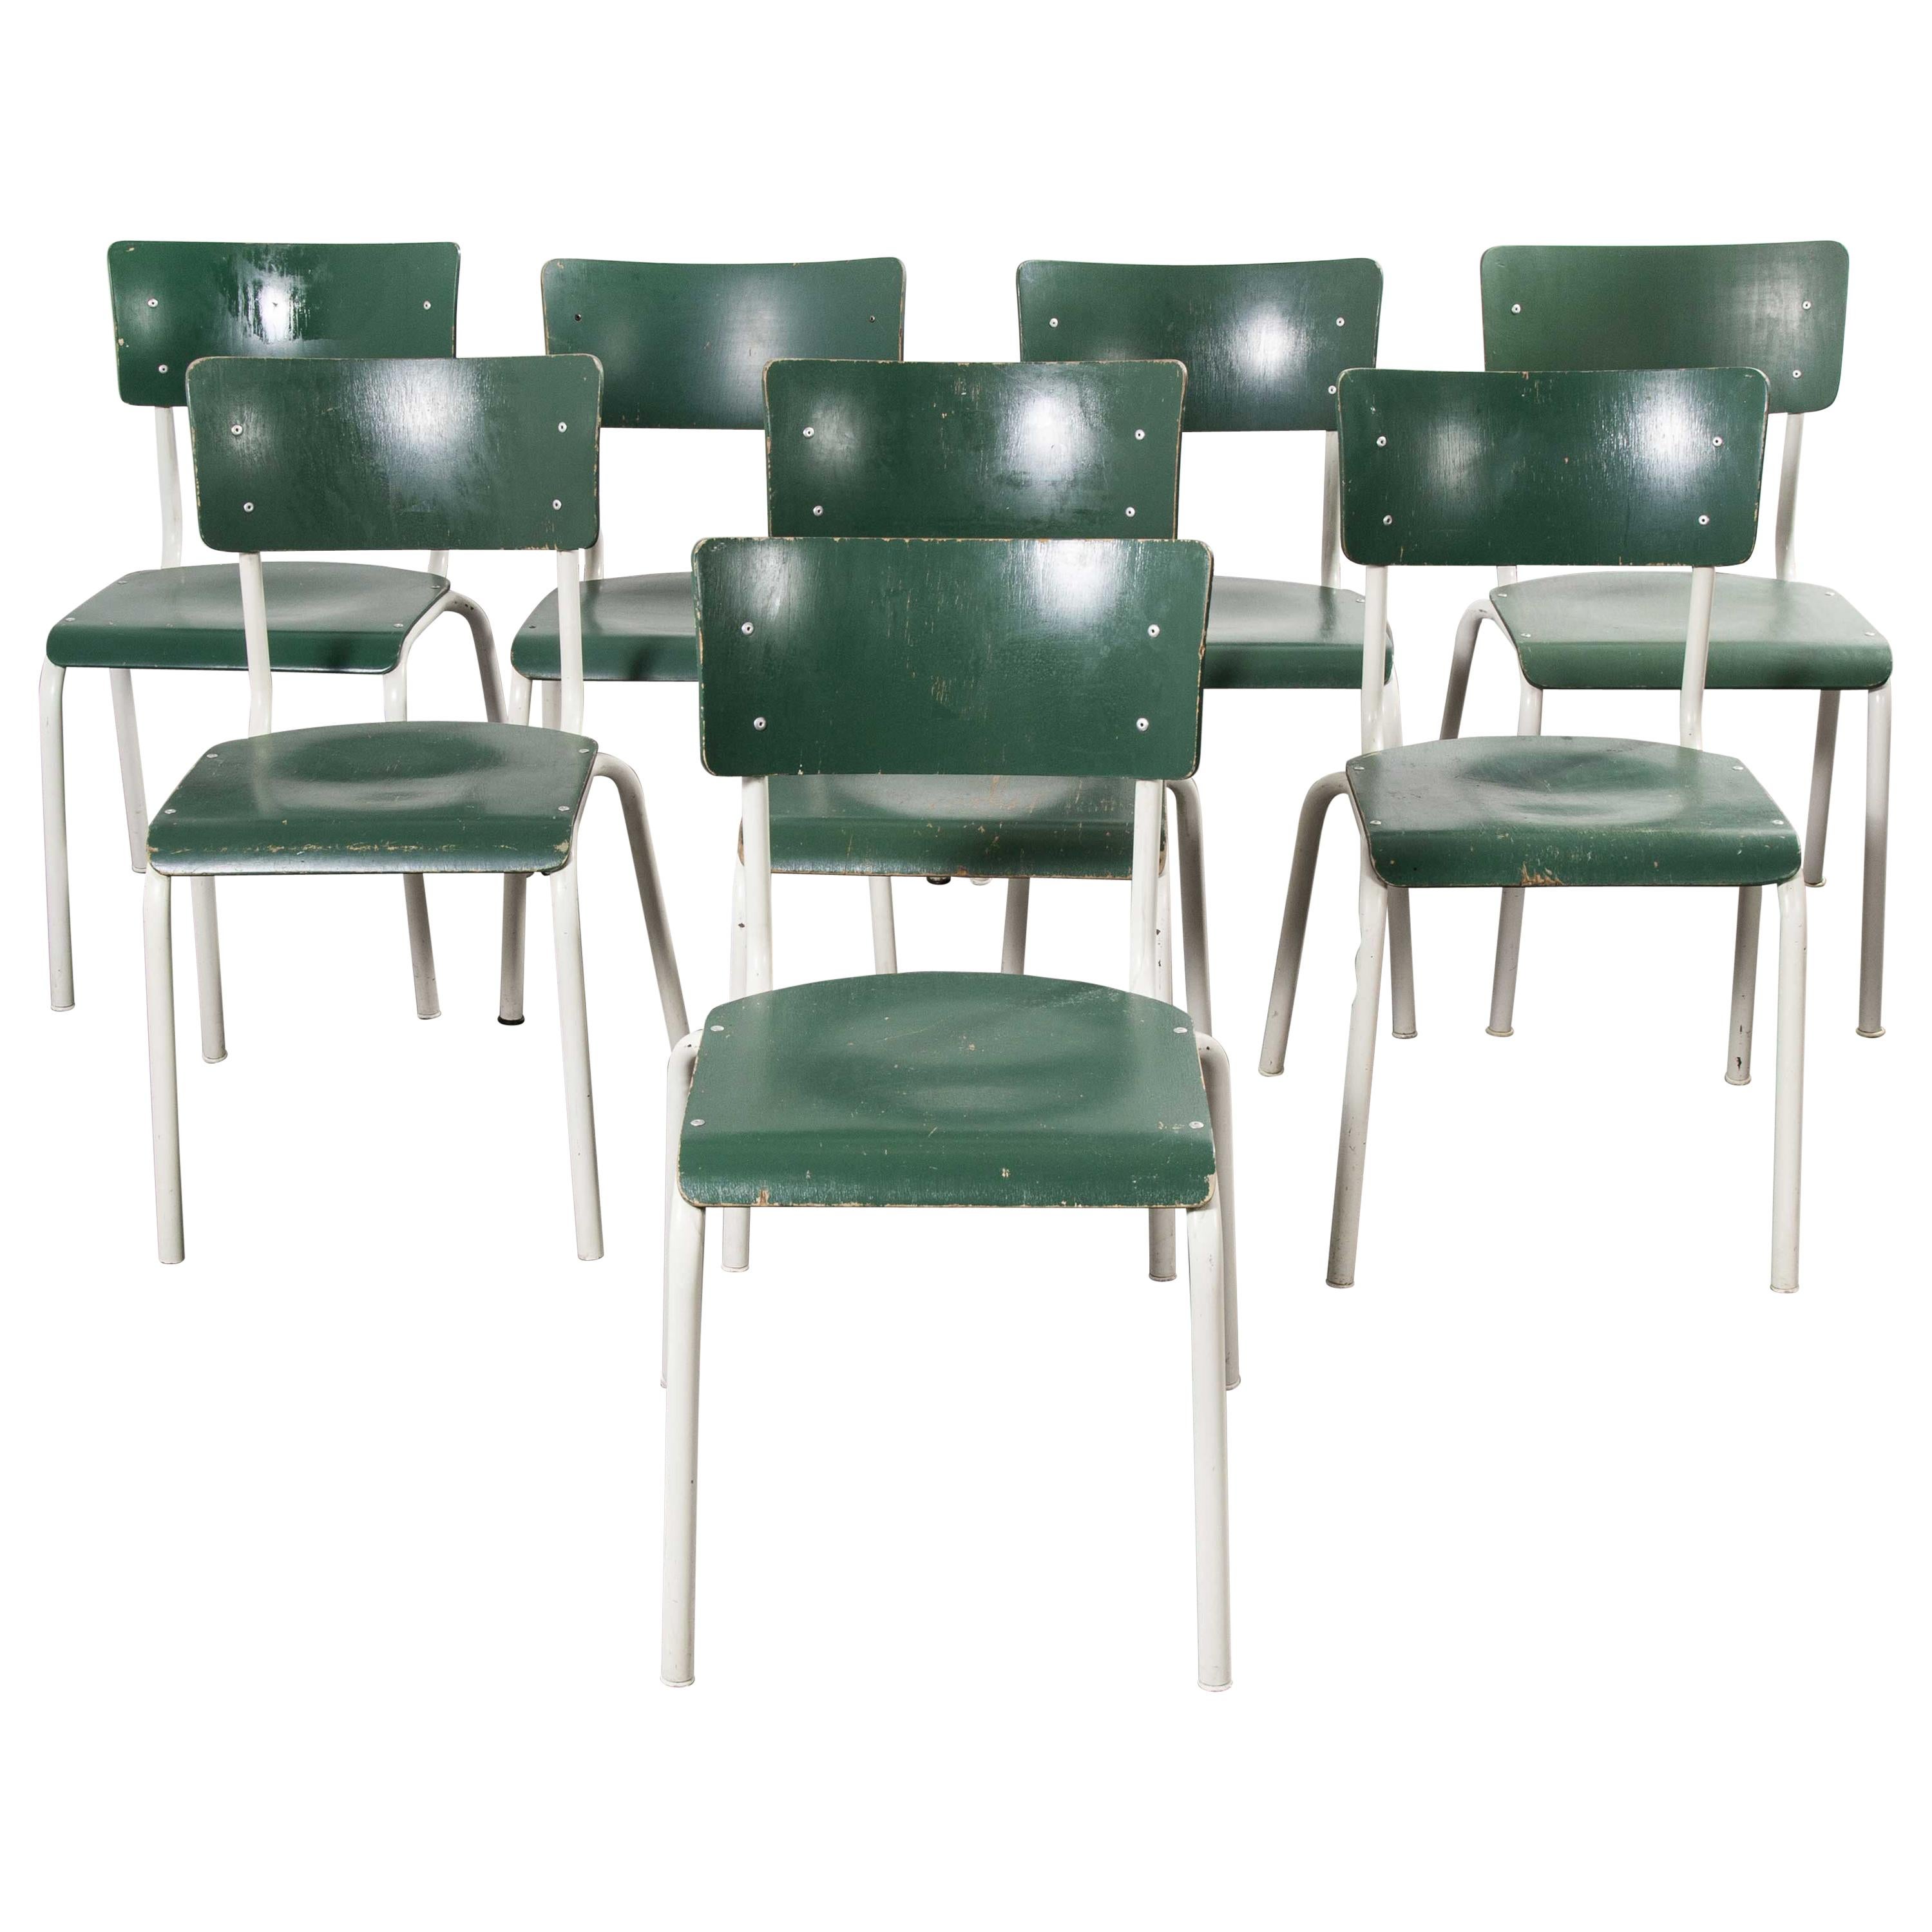 1970s Thonet Stacking Dining Chairs for the German Army, Green, Set of Eight